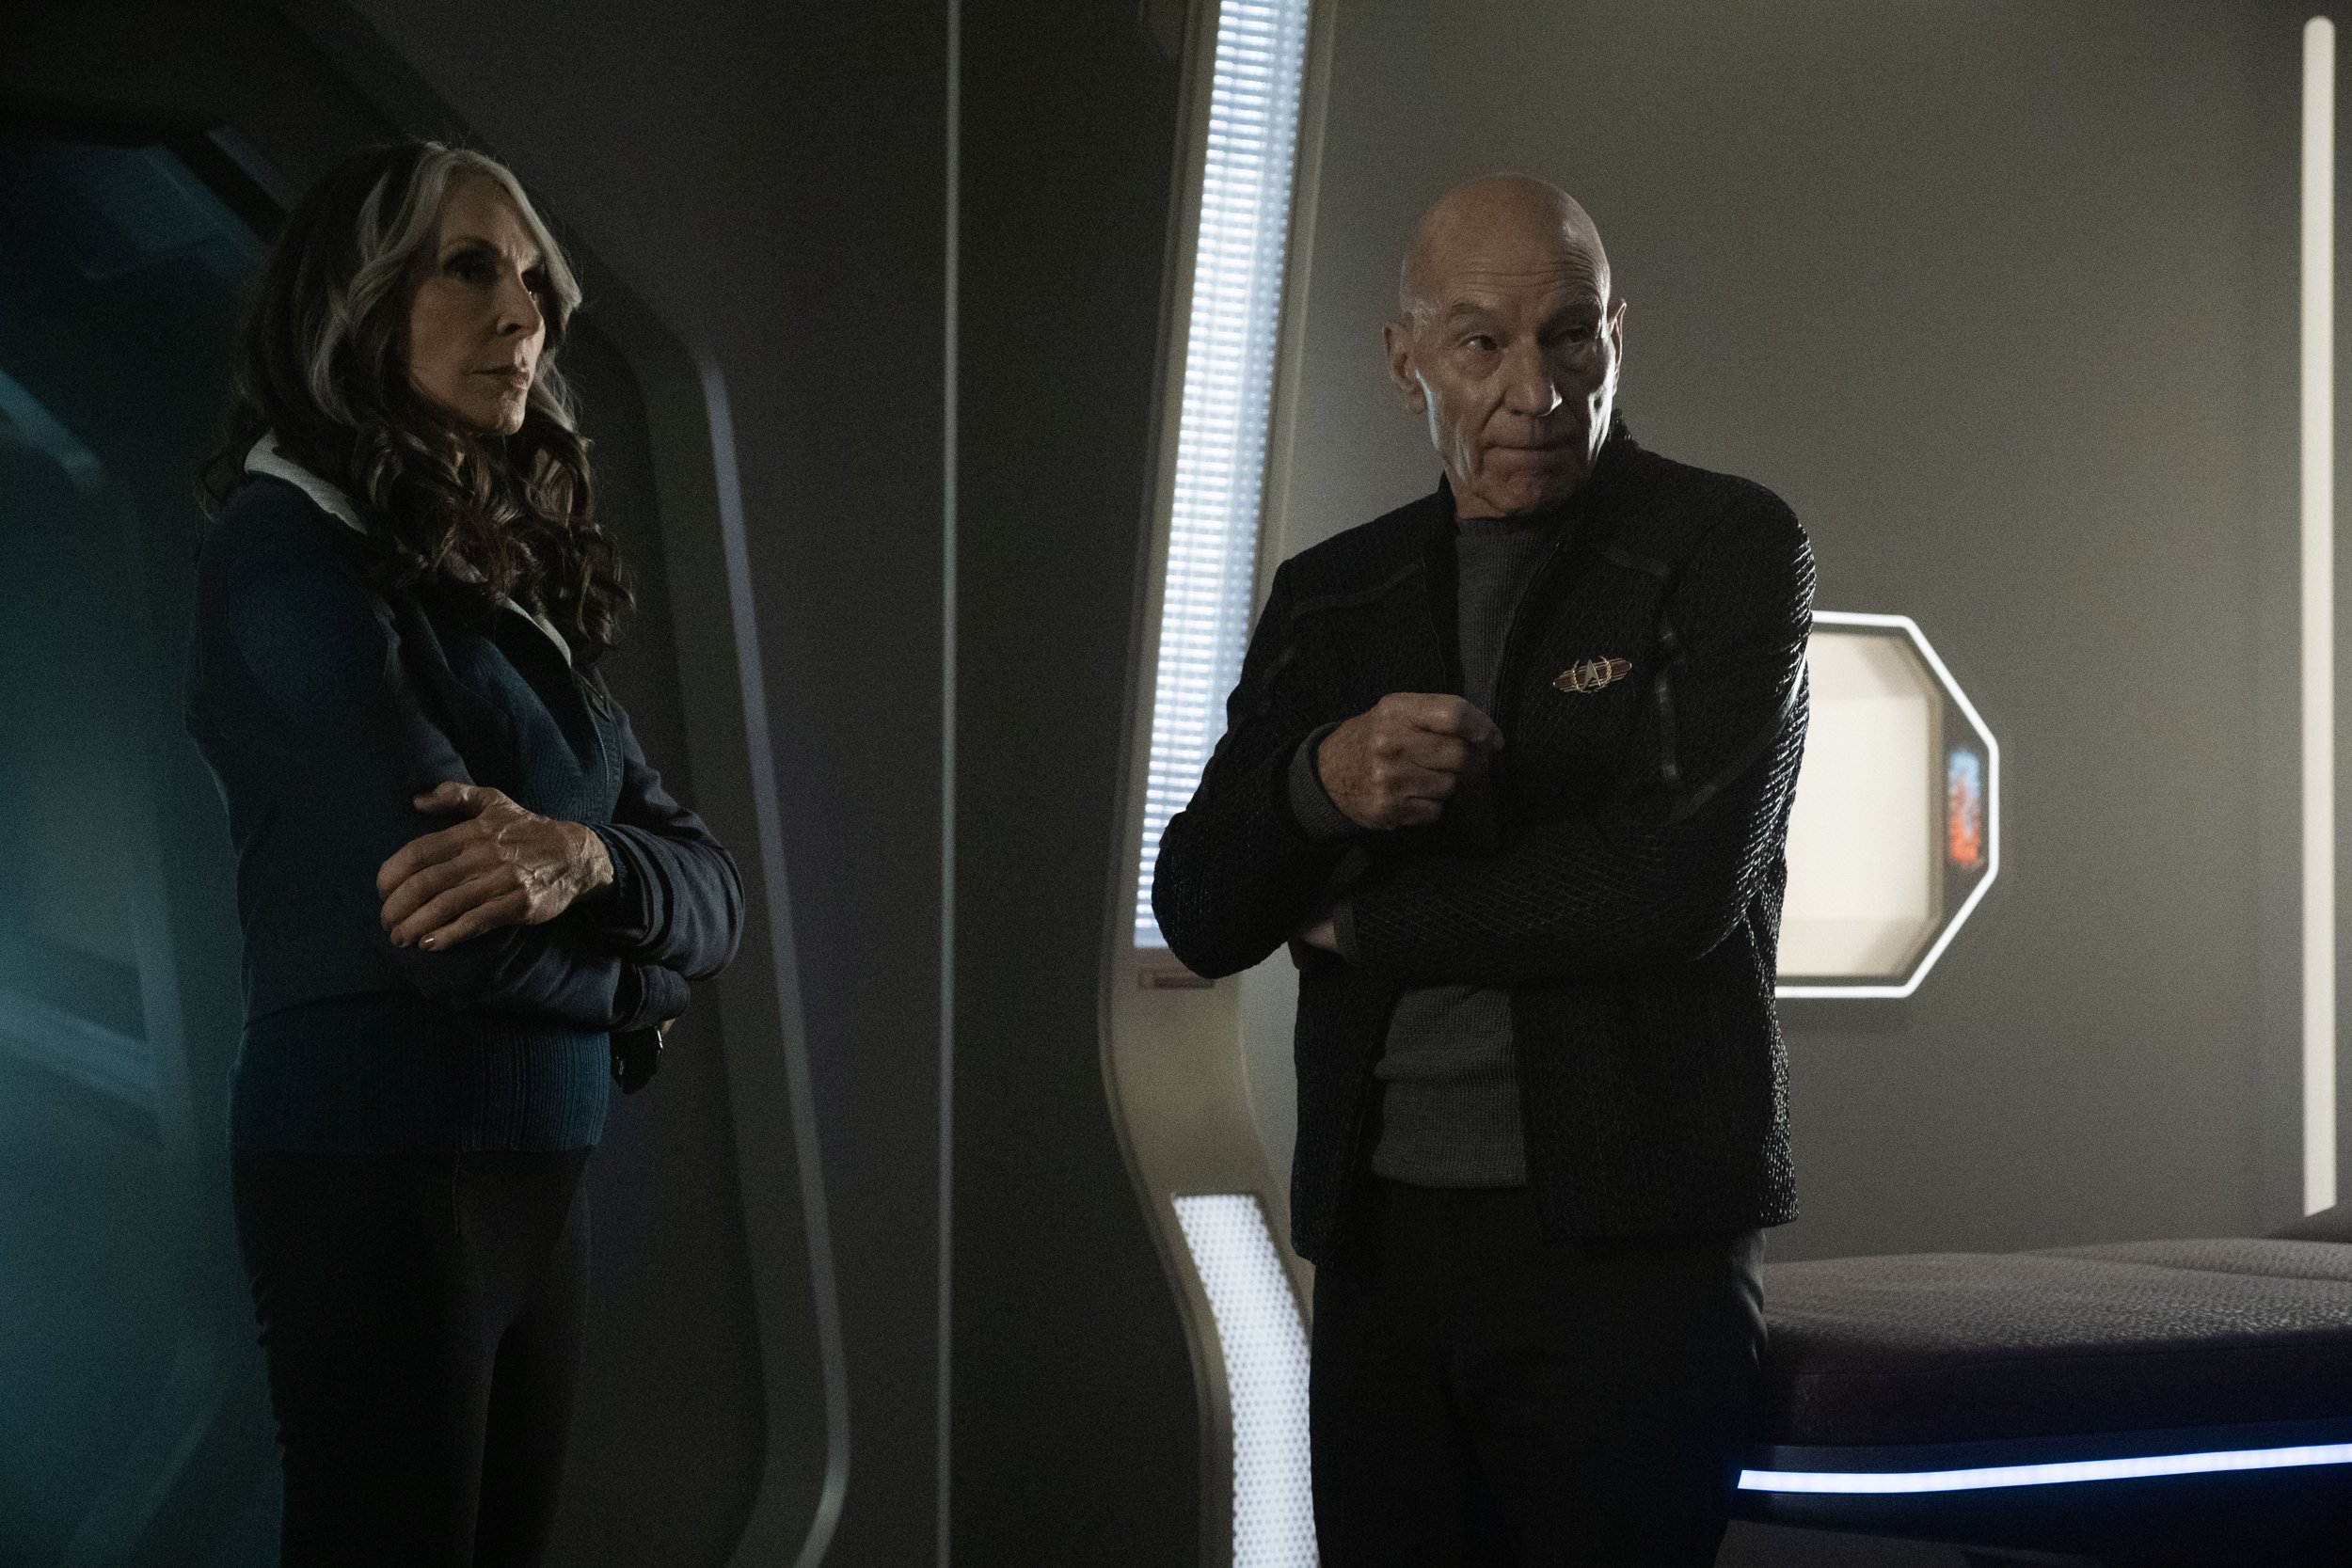   Gates McFadden  as Dr. Beverly Crusher and  Patrick Stewart  as Picard.  Photo Credit: Trae Patton/Paramount+.  